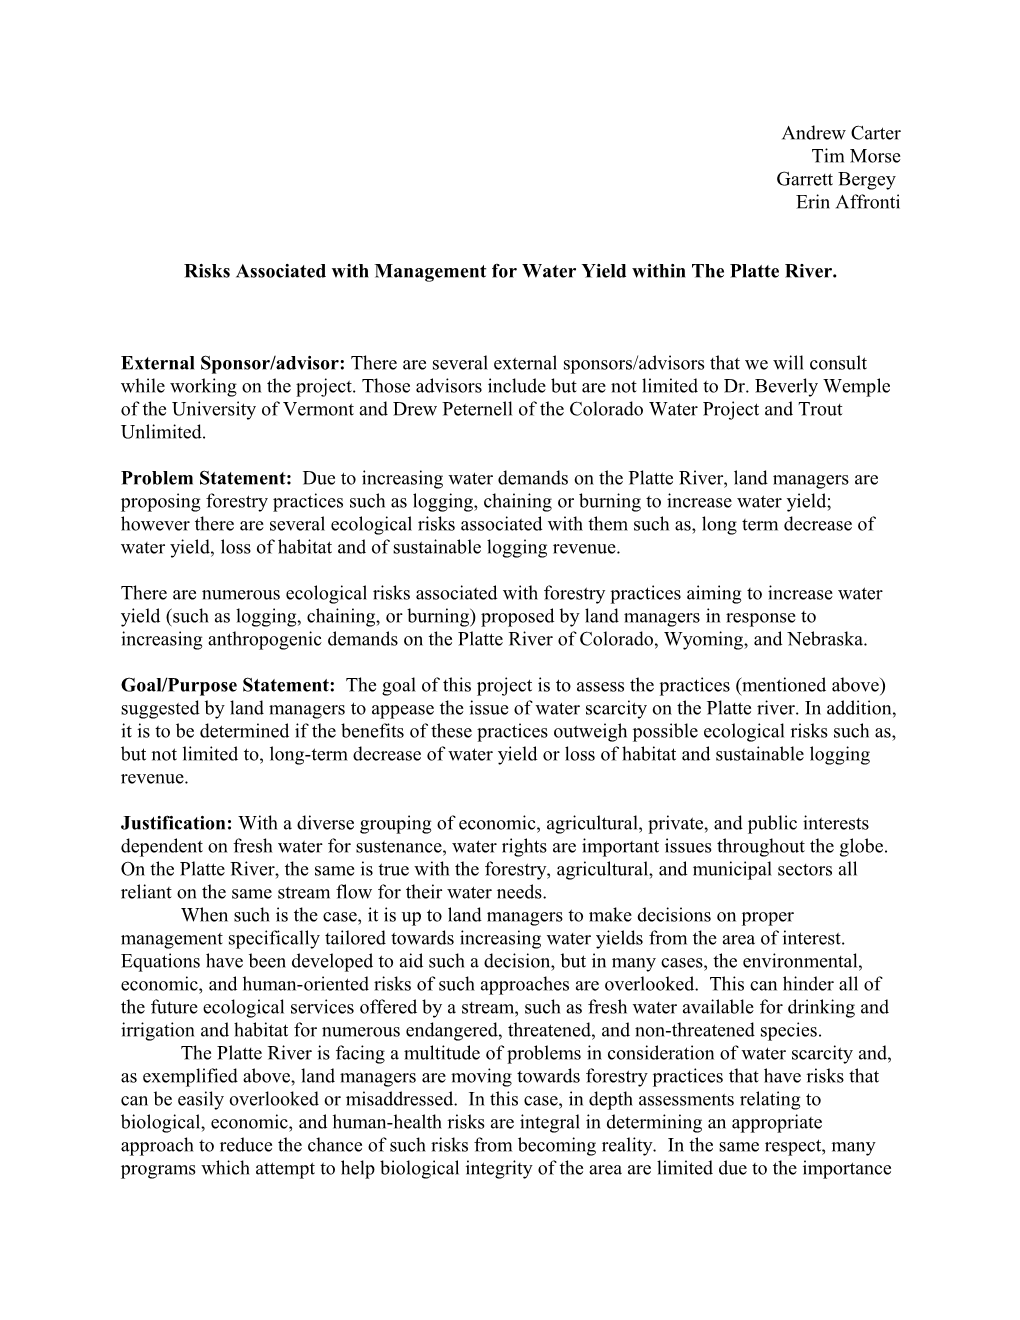 Risks Associated with Management for Water Yield Within the Platte River